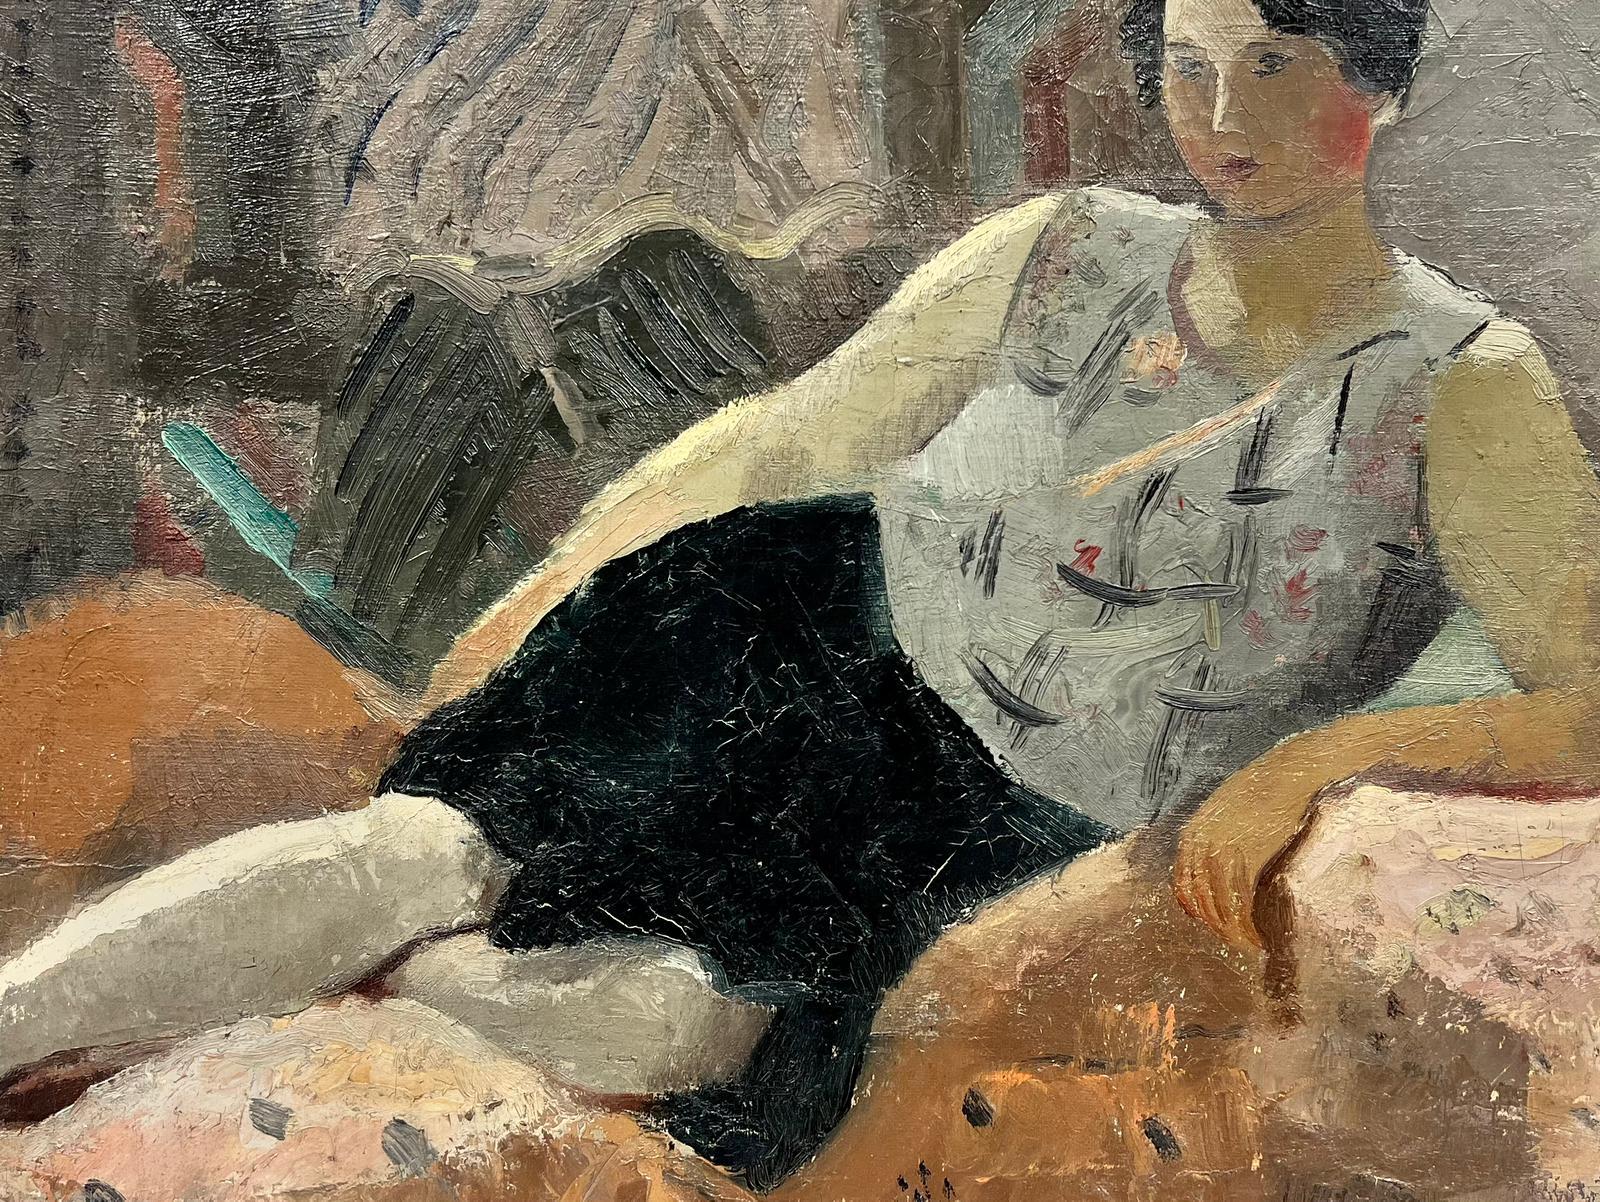 Artist/ School: French School, circa 1930's period, signed

Title: The Artists Model

Medium: oil on canvas, unframed

Painting: 18 x 24 inches

Provenance: private collection, France

Condition: The painting is in overall very good and sound